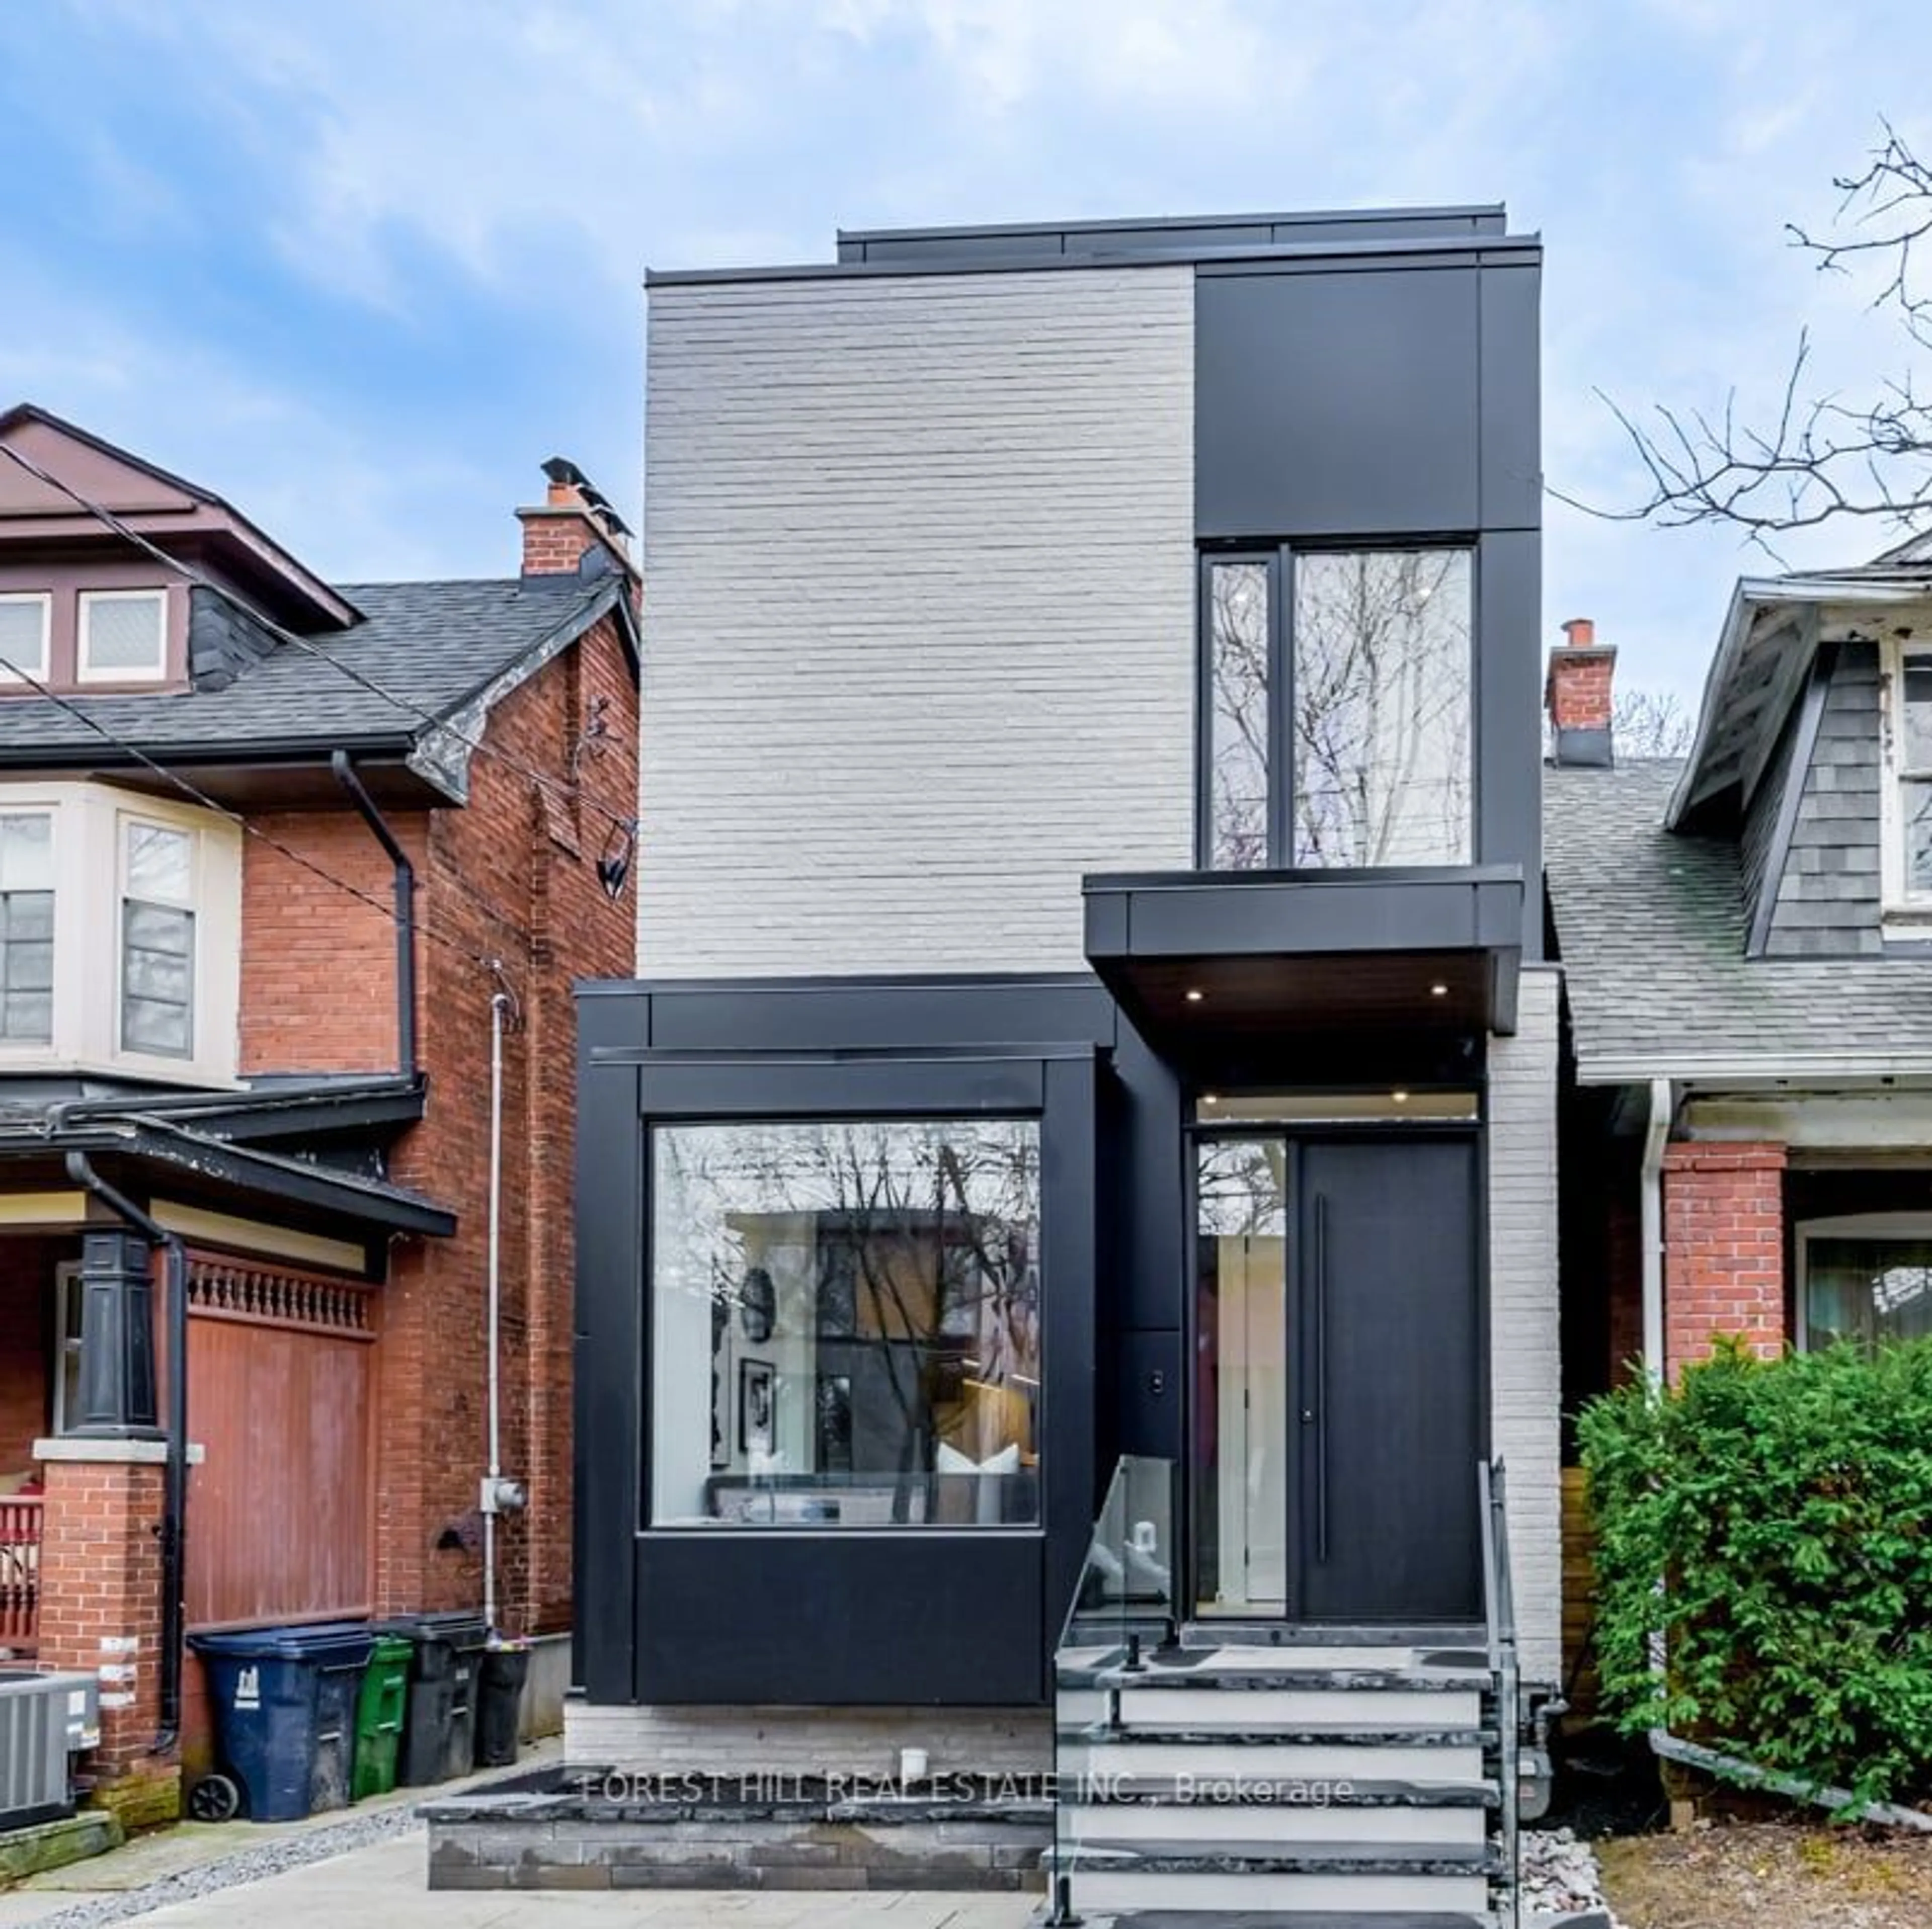 Home with brick exterior material for 127 Sherwood Ave, Toronto Ontario M4P 2A6